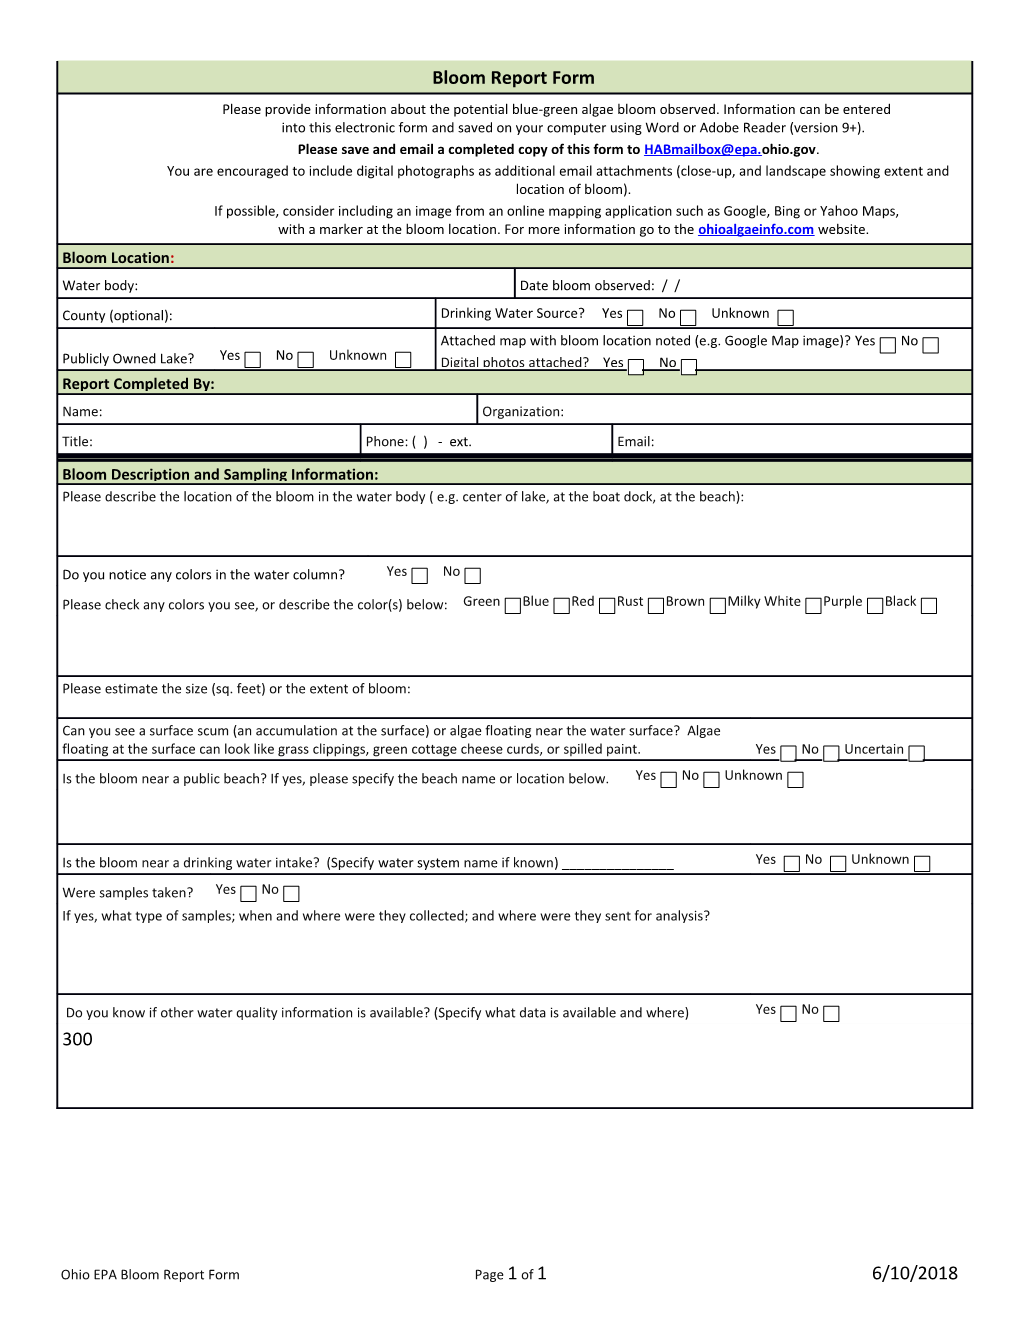 Ohio EPA Bloom Report Form Page 1 of 1 6/27/2014